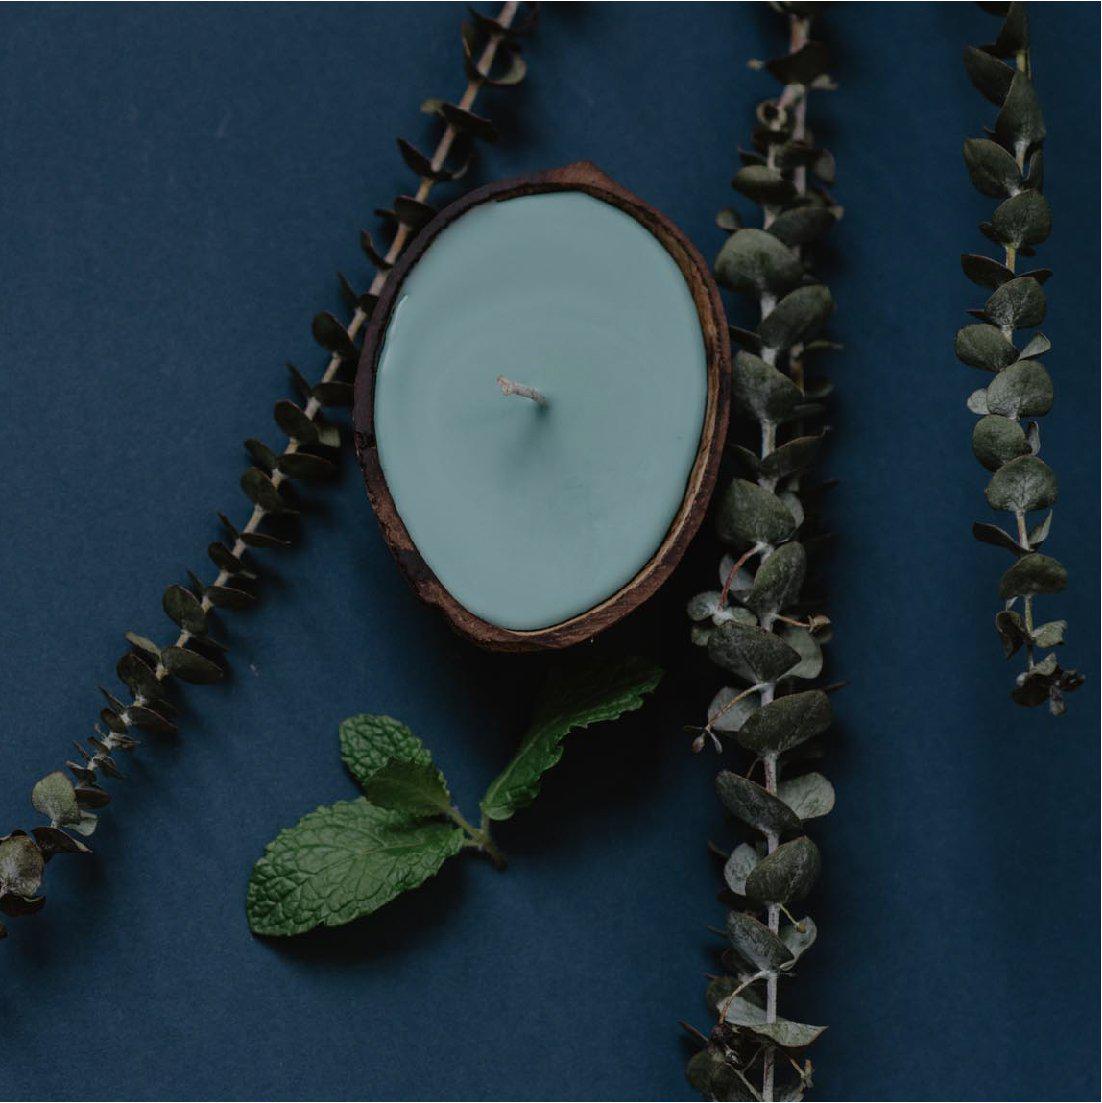 peppermint and eucalyptus candle